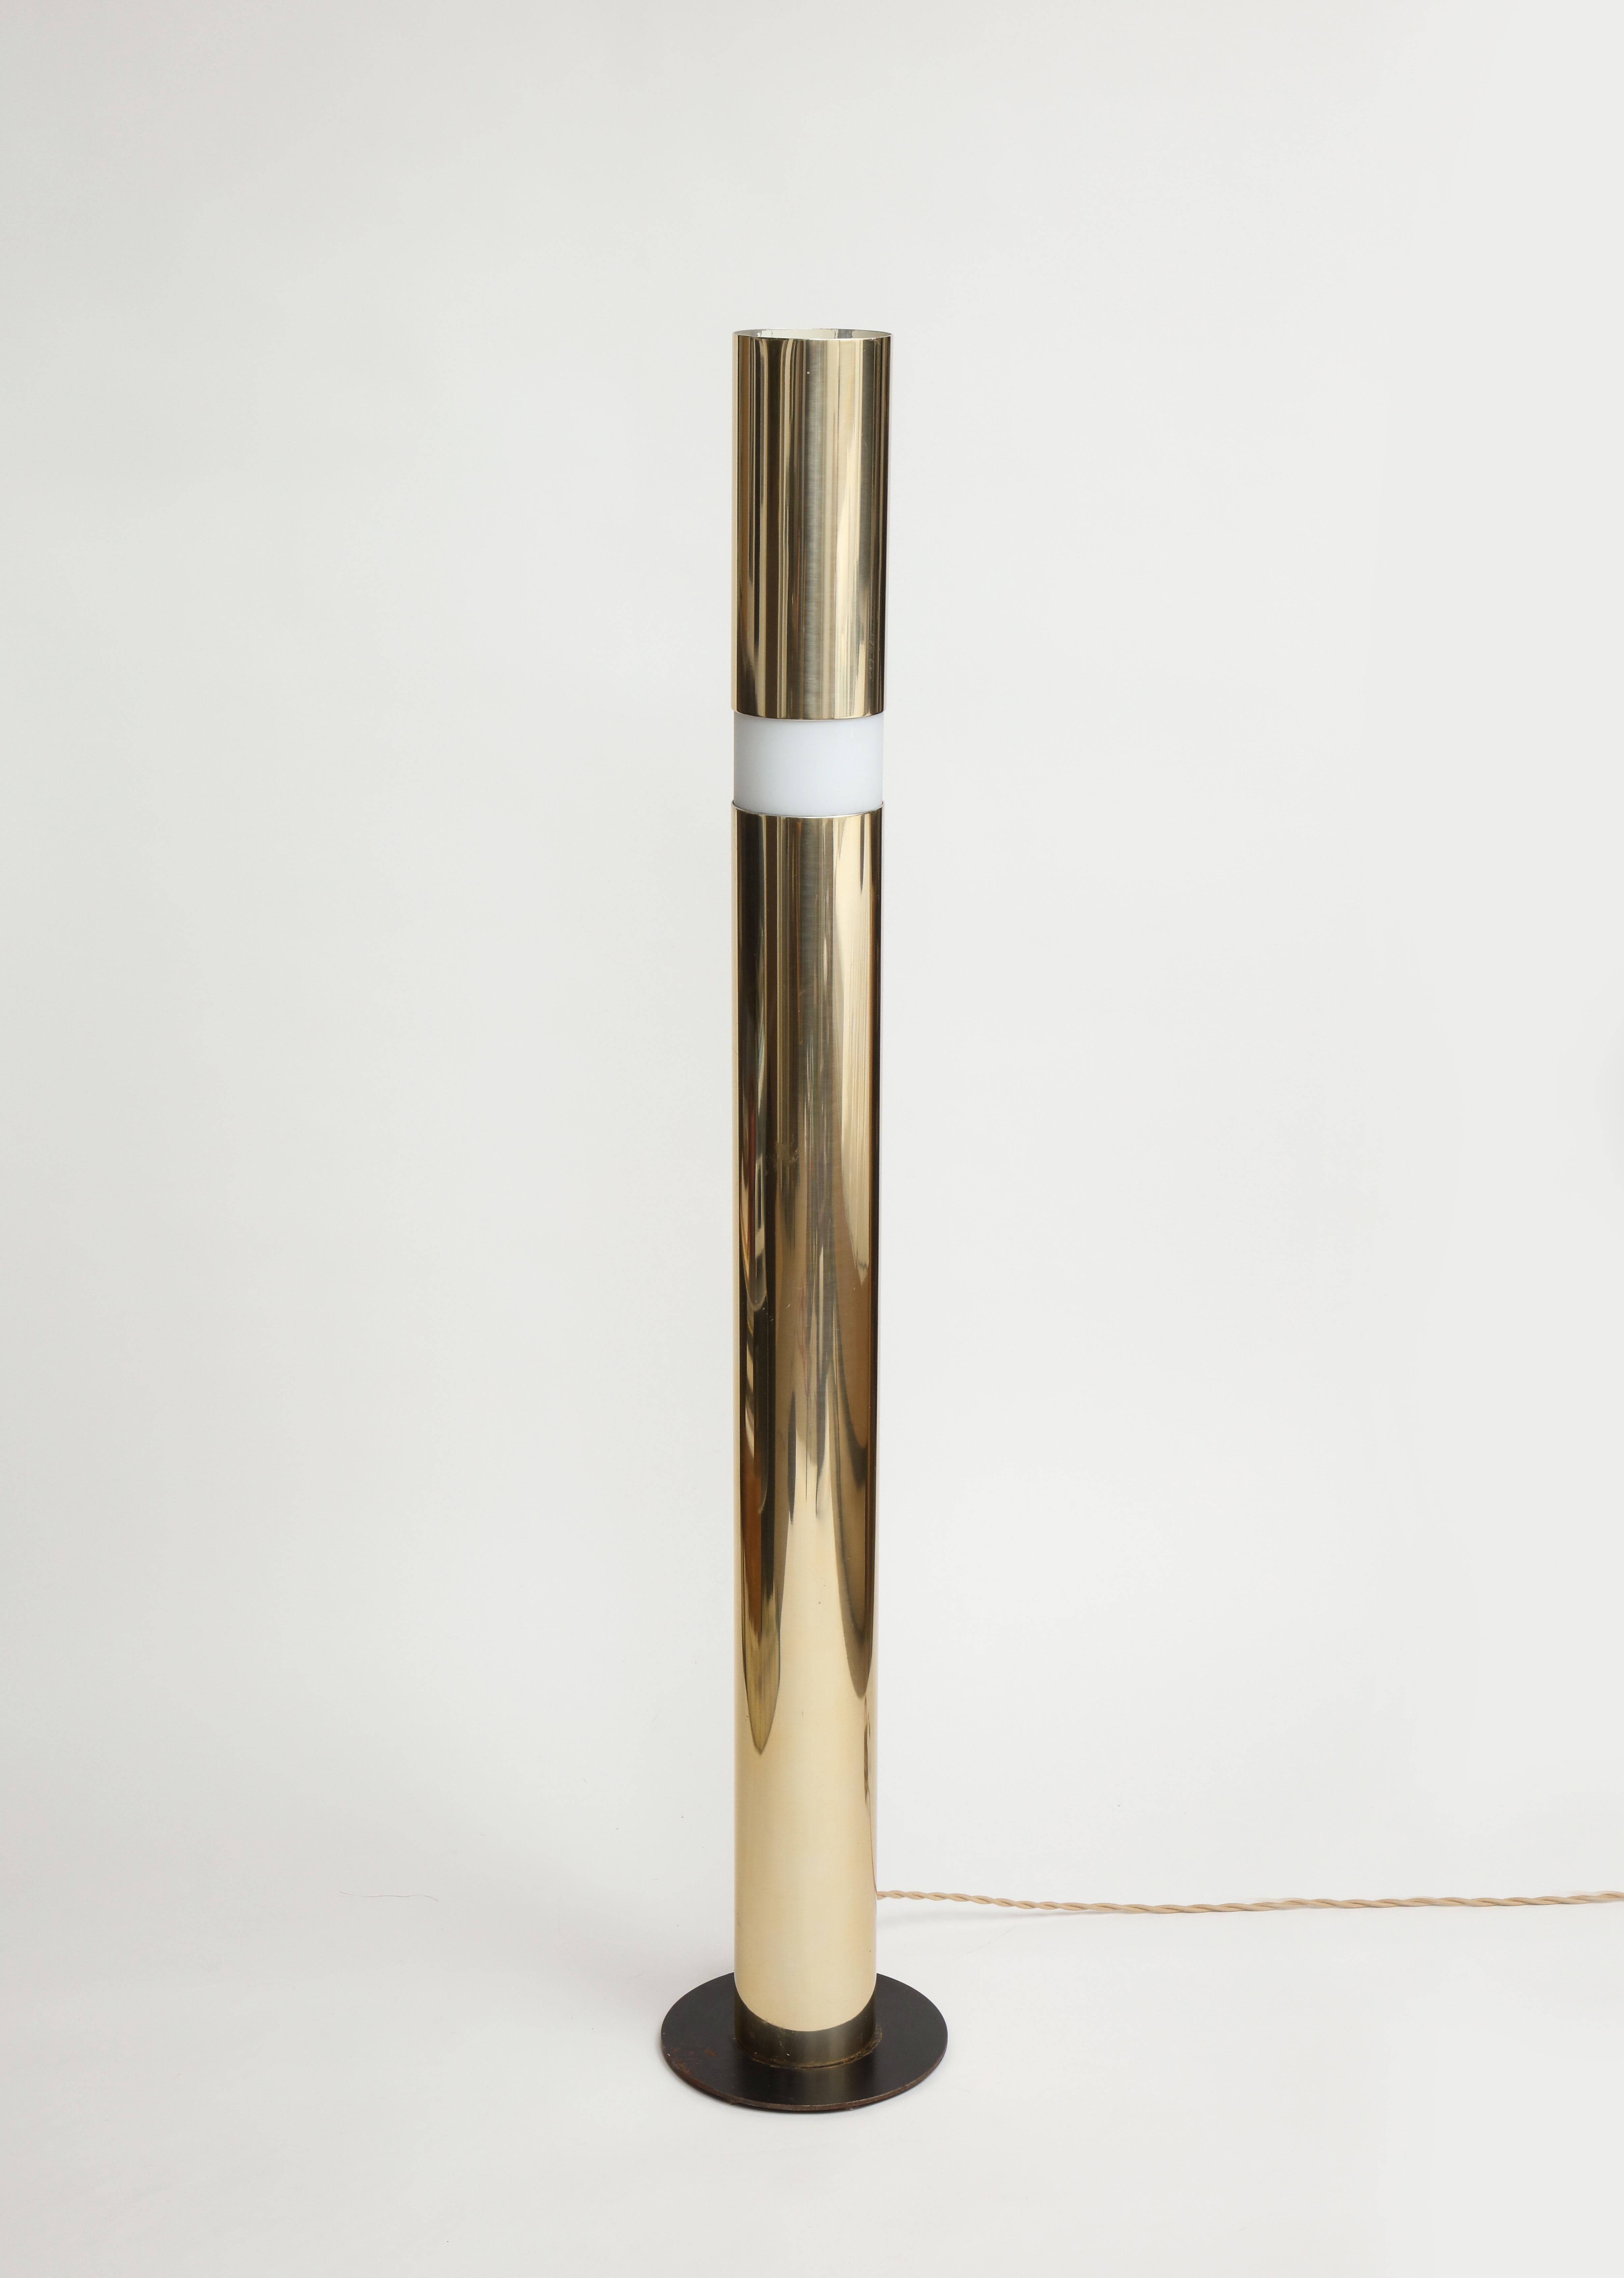 Special piece. The top aspect of the cylinder form is an operable shade that moves up and down to modulate light by covering the etched diffuser. The base is patinated steel. The body of the fixture is aluminum plated in polished brass. The interior